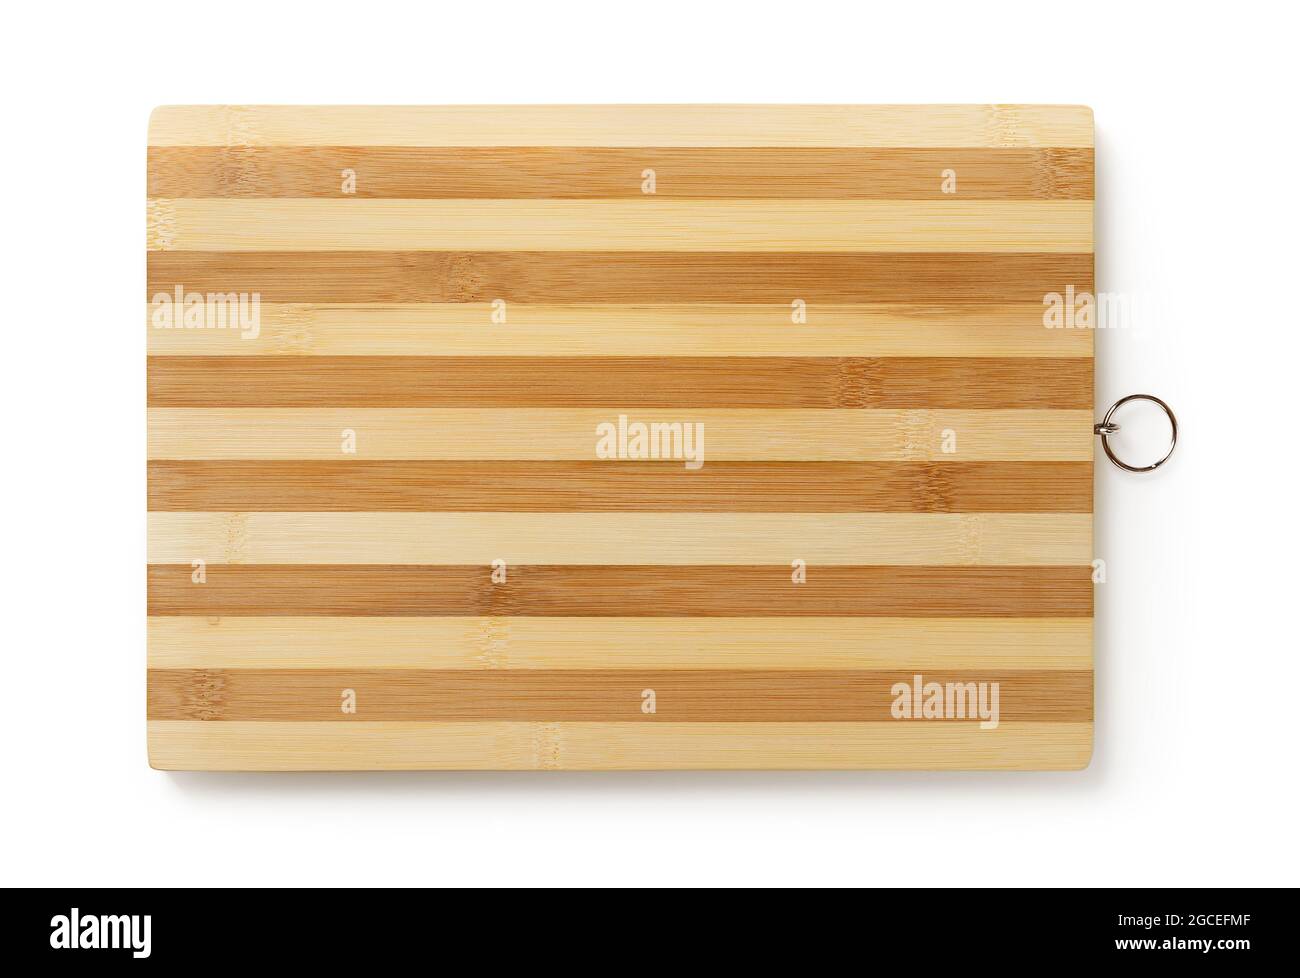 https://c8.alamy.com/comp/2GCEFMF/striped-wooden-cutting-board-isolated-on-white-background-new-bamboo-chopping-board-as-design-element-modern-kitchen-utensils-of-natural-materials-2GCEFMF.jpg